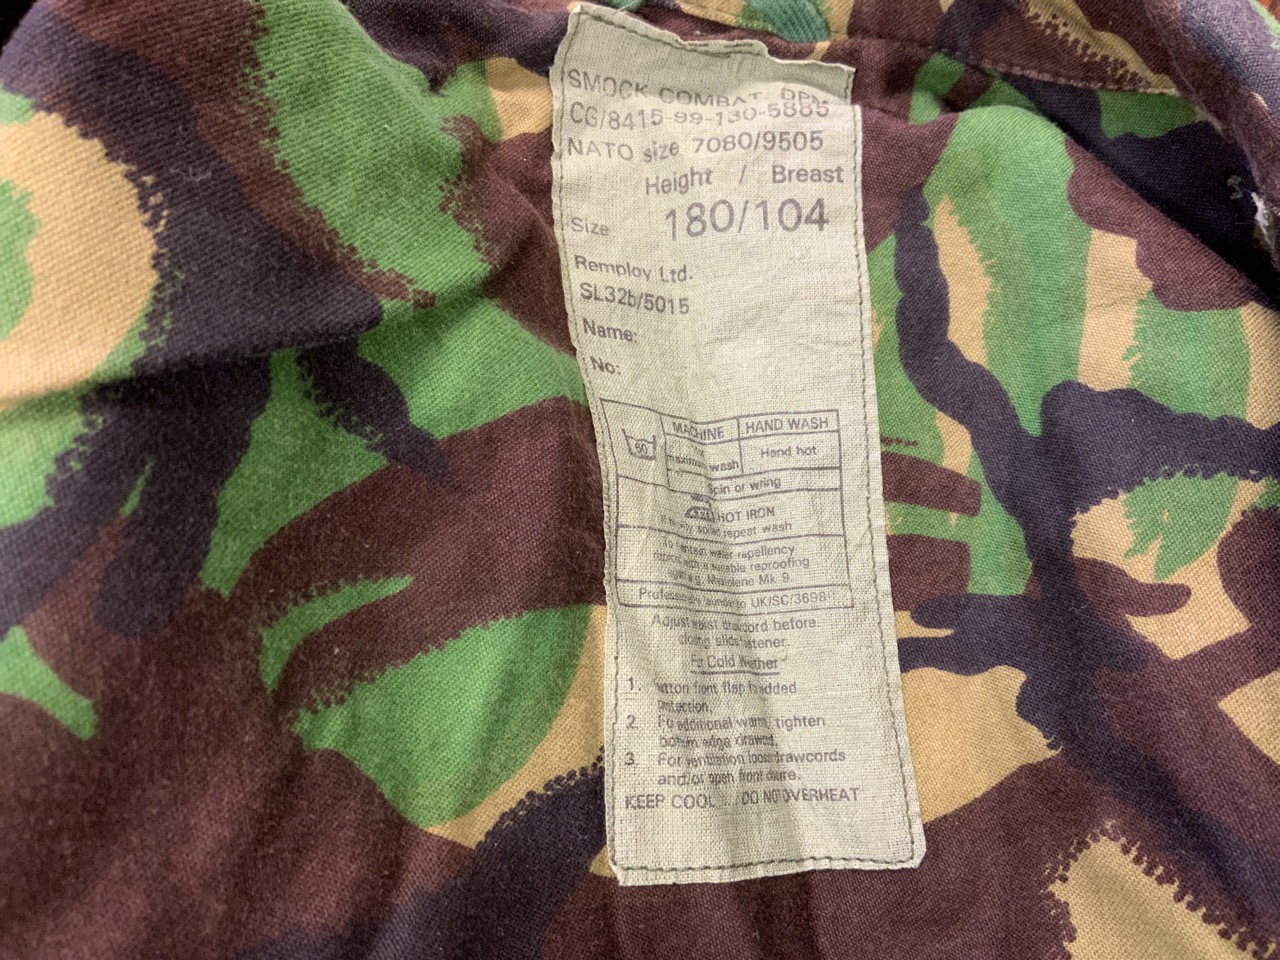 A combat smock and trousers. Size 180/104. Cotton smock - waterproof trousers - Image 6 of 7